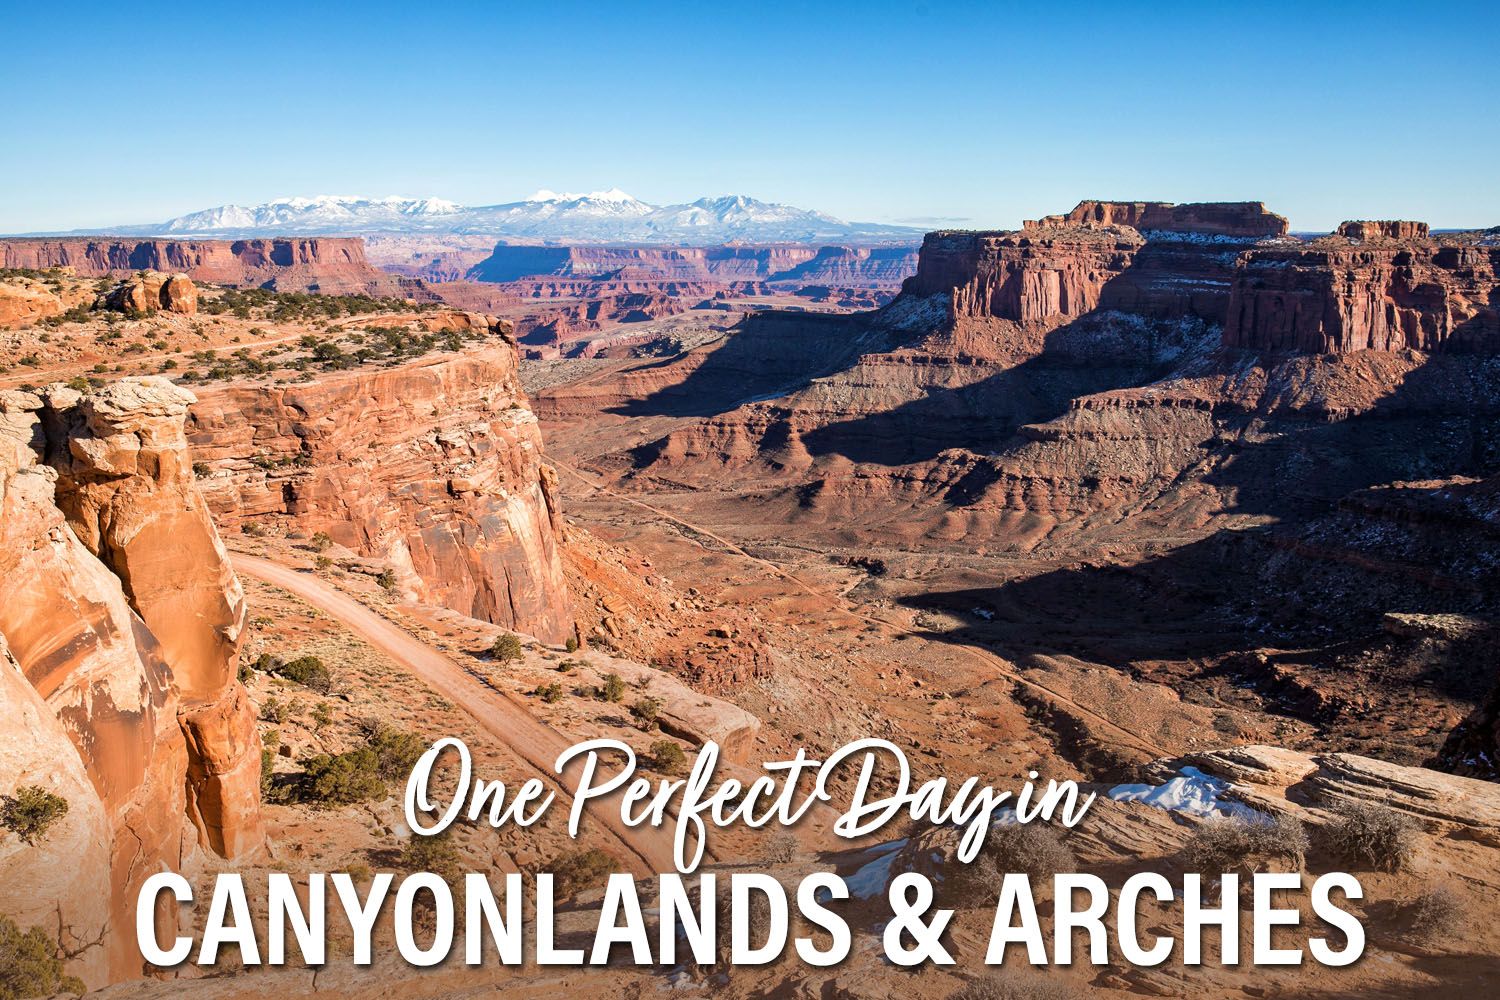 One Day in Canyonlands Arches